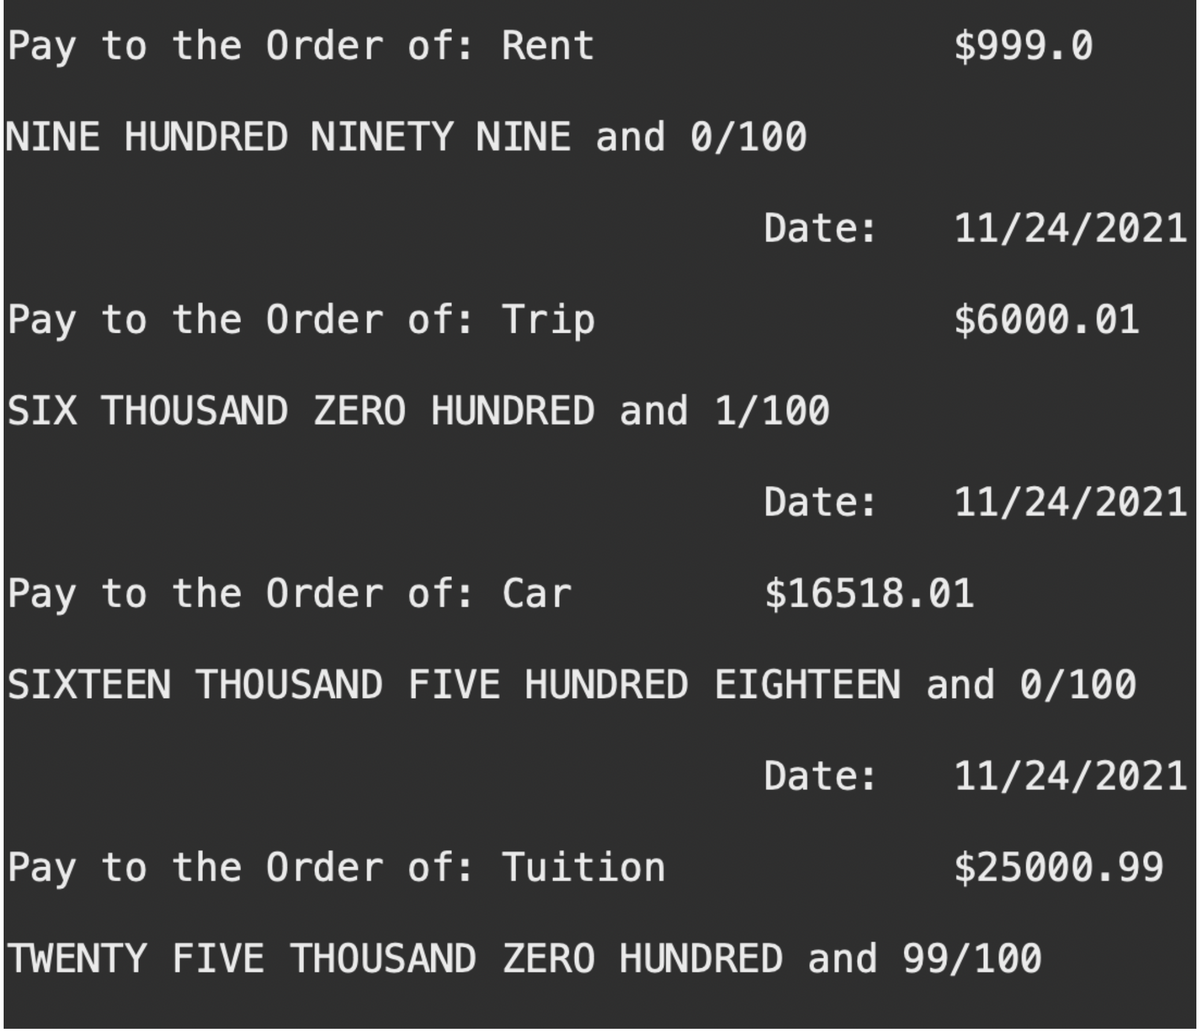 Pay to the Order of: Rent
NINE HUNDRED NINETY NINE and 0/100
Date:
Pay to the Order of: Trip
SIX THOUSAND ZERO HUNDRED and 1/100
Pay to the Order of: Car
SIXTEEN THOUSAND FIVE HUNDRED
Date:
$999.0
11/24/2021
$6000.01
11/24/2021
$16518.01
EIGHTEEN and 0/100
Date: 11/24/2021
$25000.99
Pay to the Order of: Tuition
TWENTY FIVE THOUSAND ZERO HUNDRED and 99/100